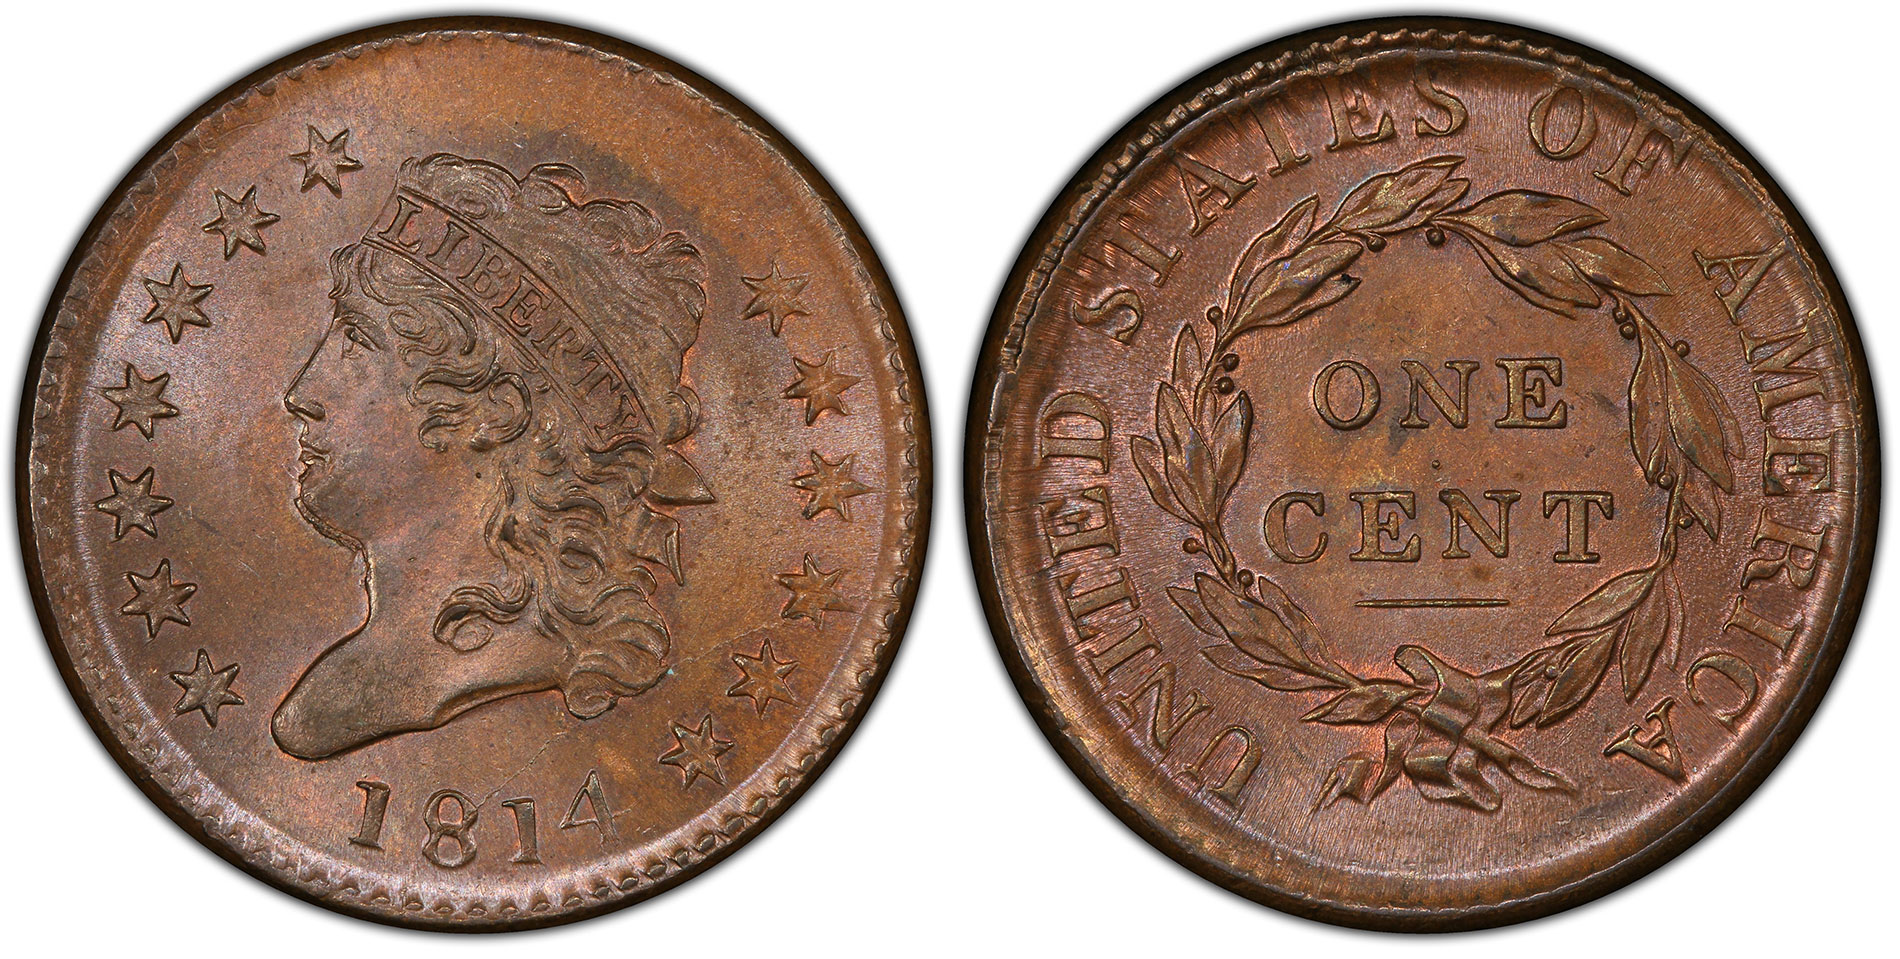 The 1814 Plain Large Cents of 1816